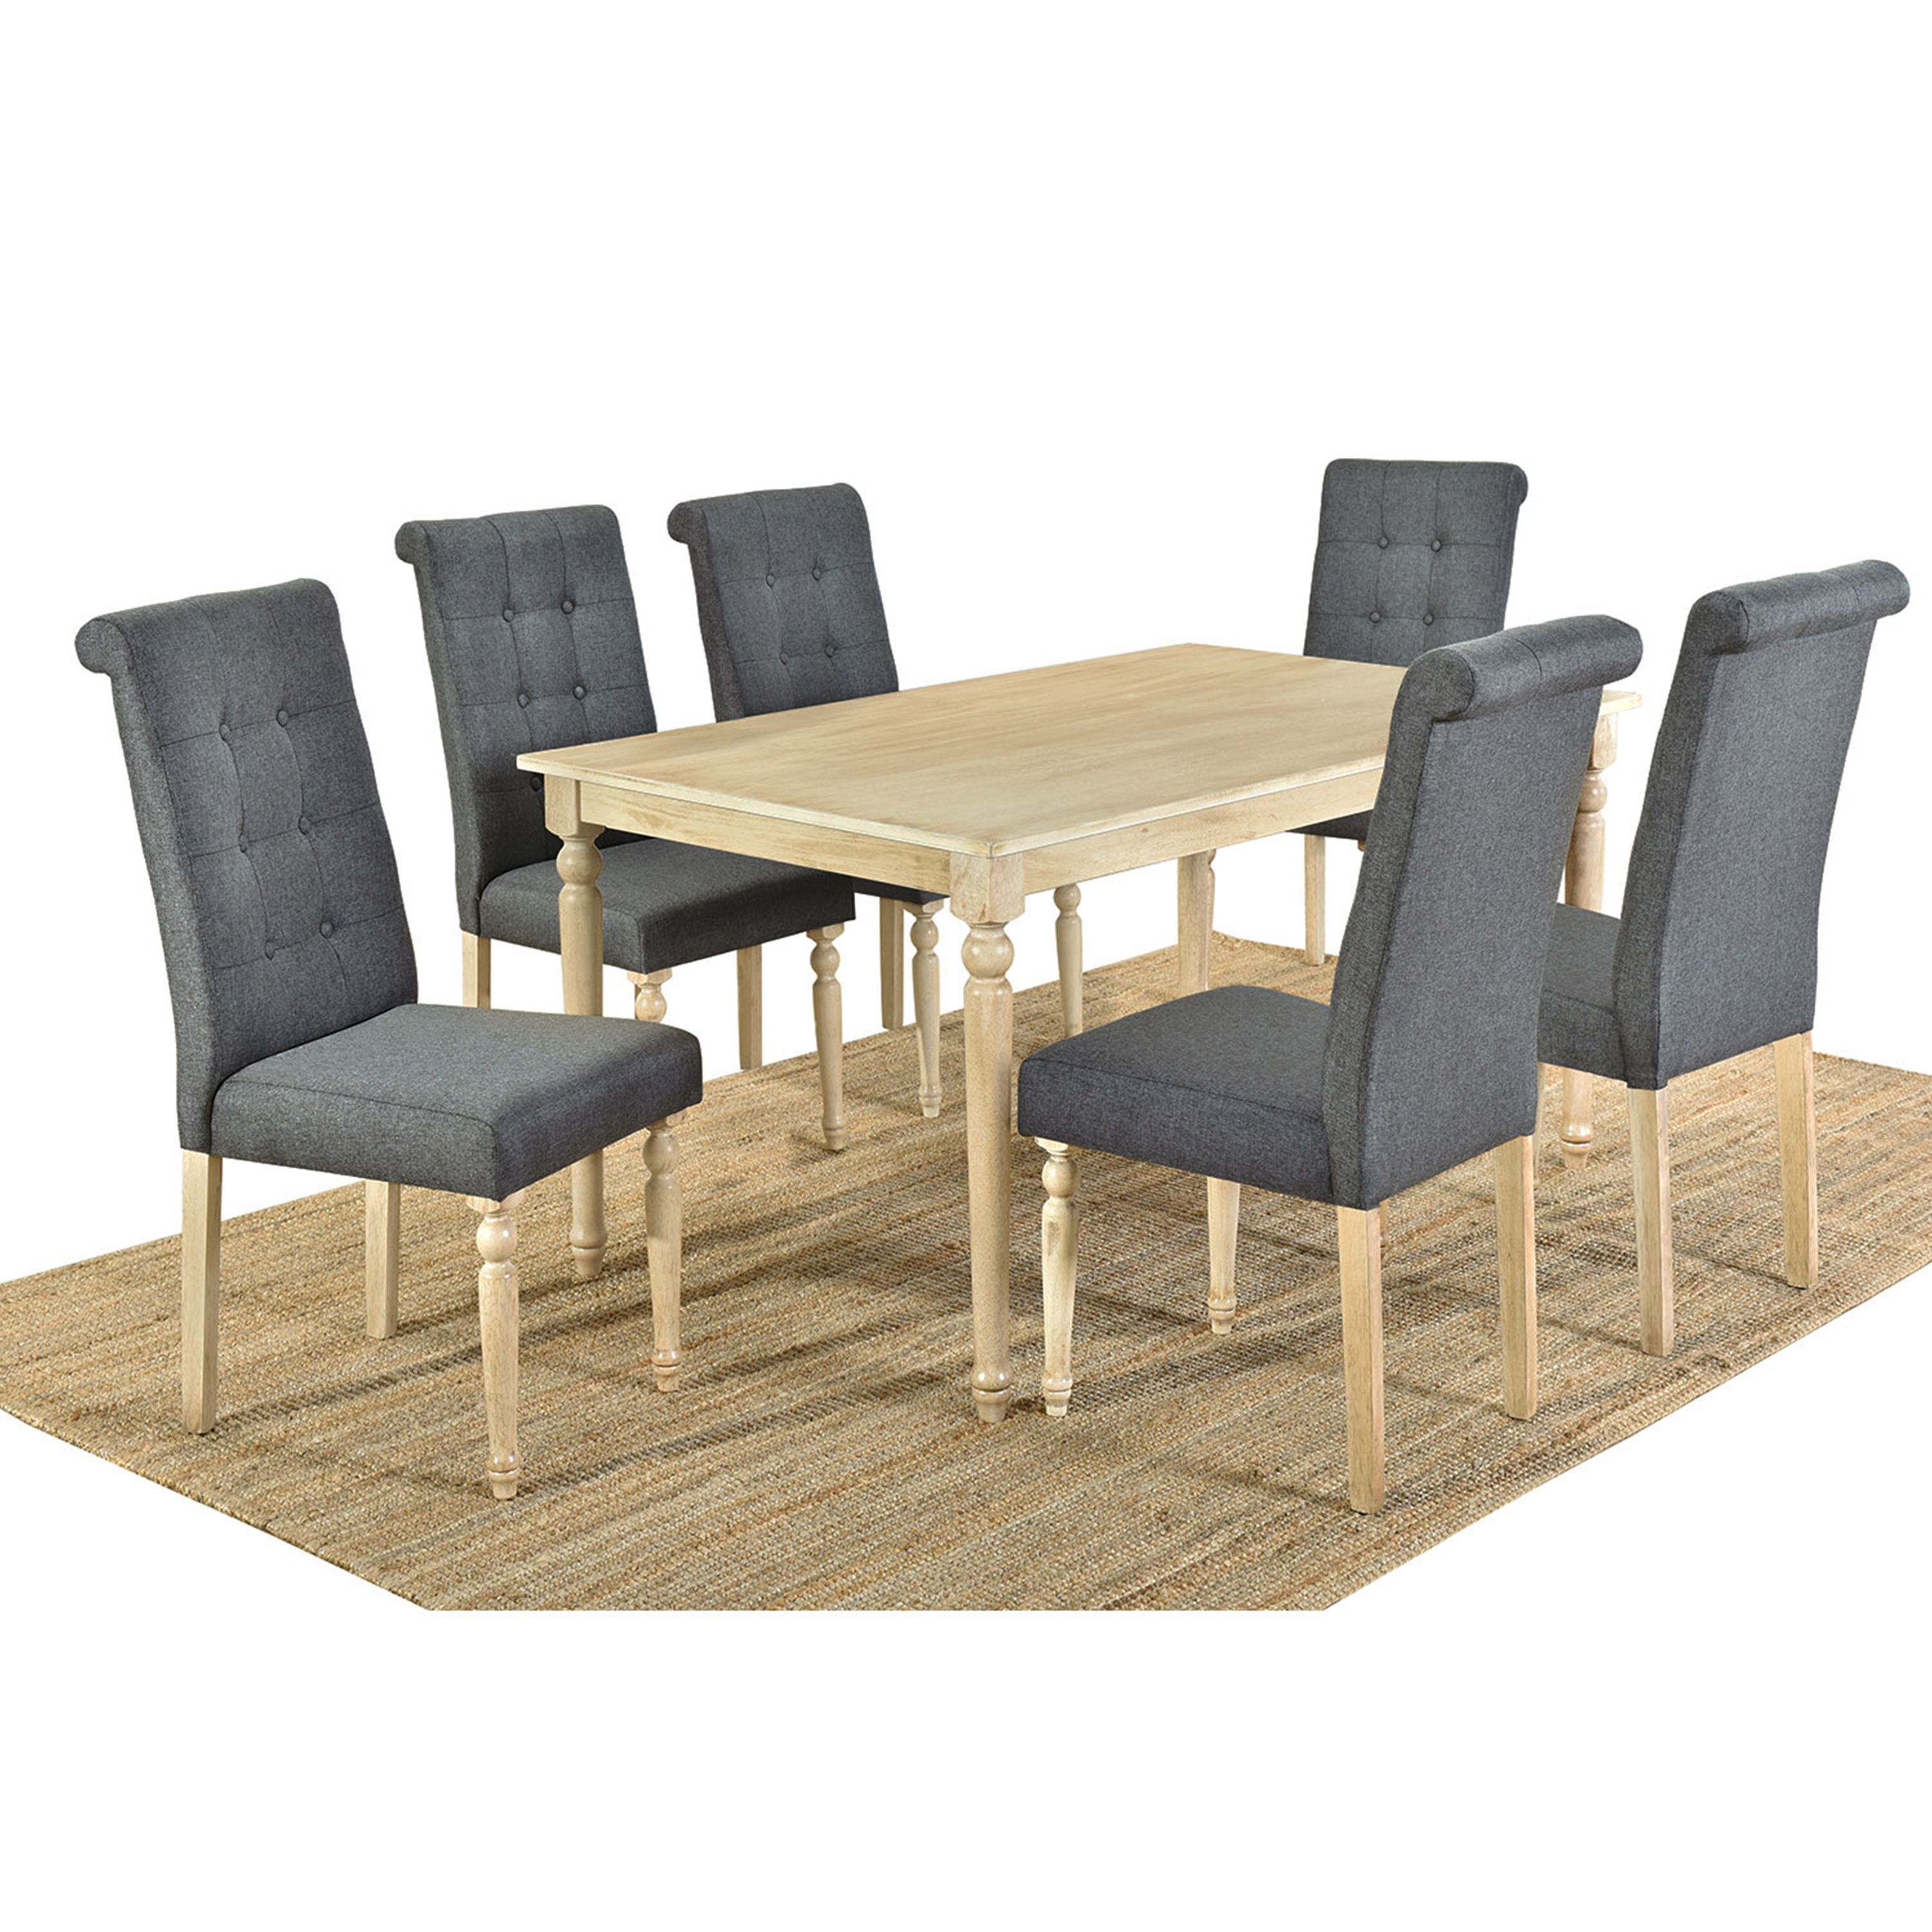 Set of 7 Wood Rectangular Dining Table Set with 6 High Back Upholstered Dining Chairs, Transitional Style-CASAINC